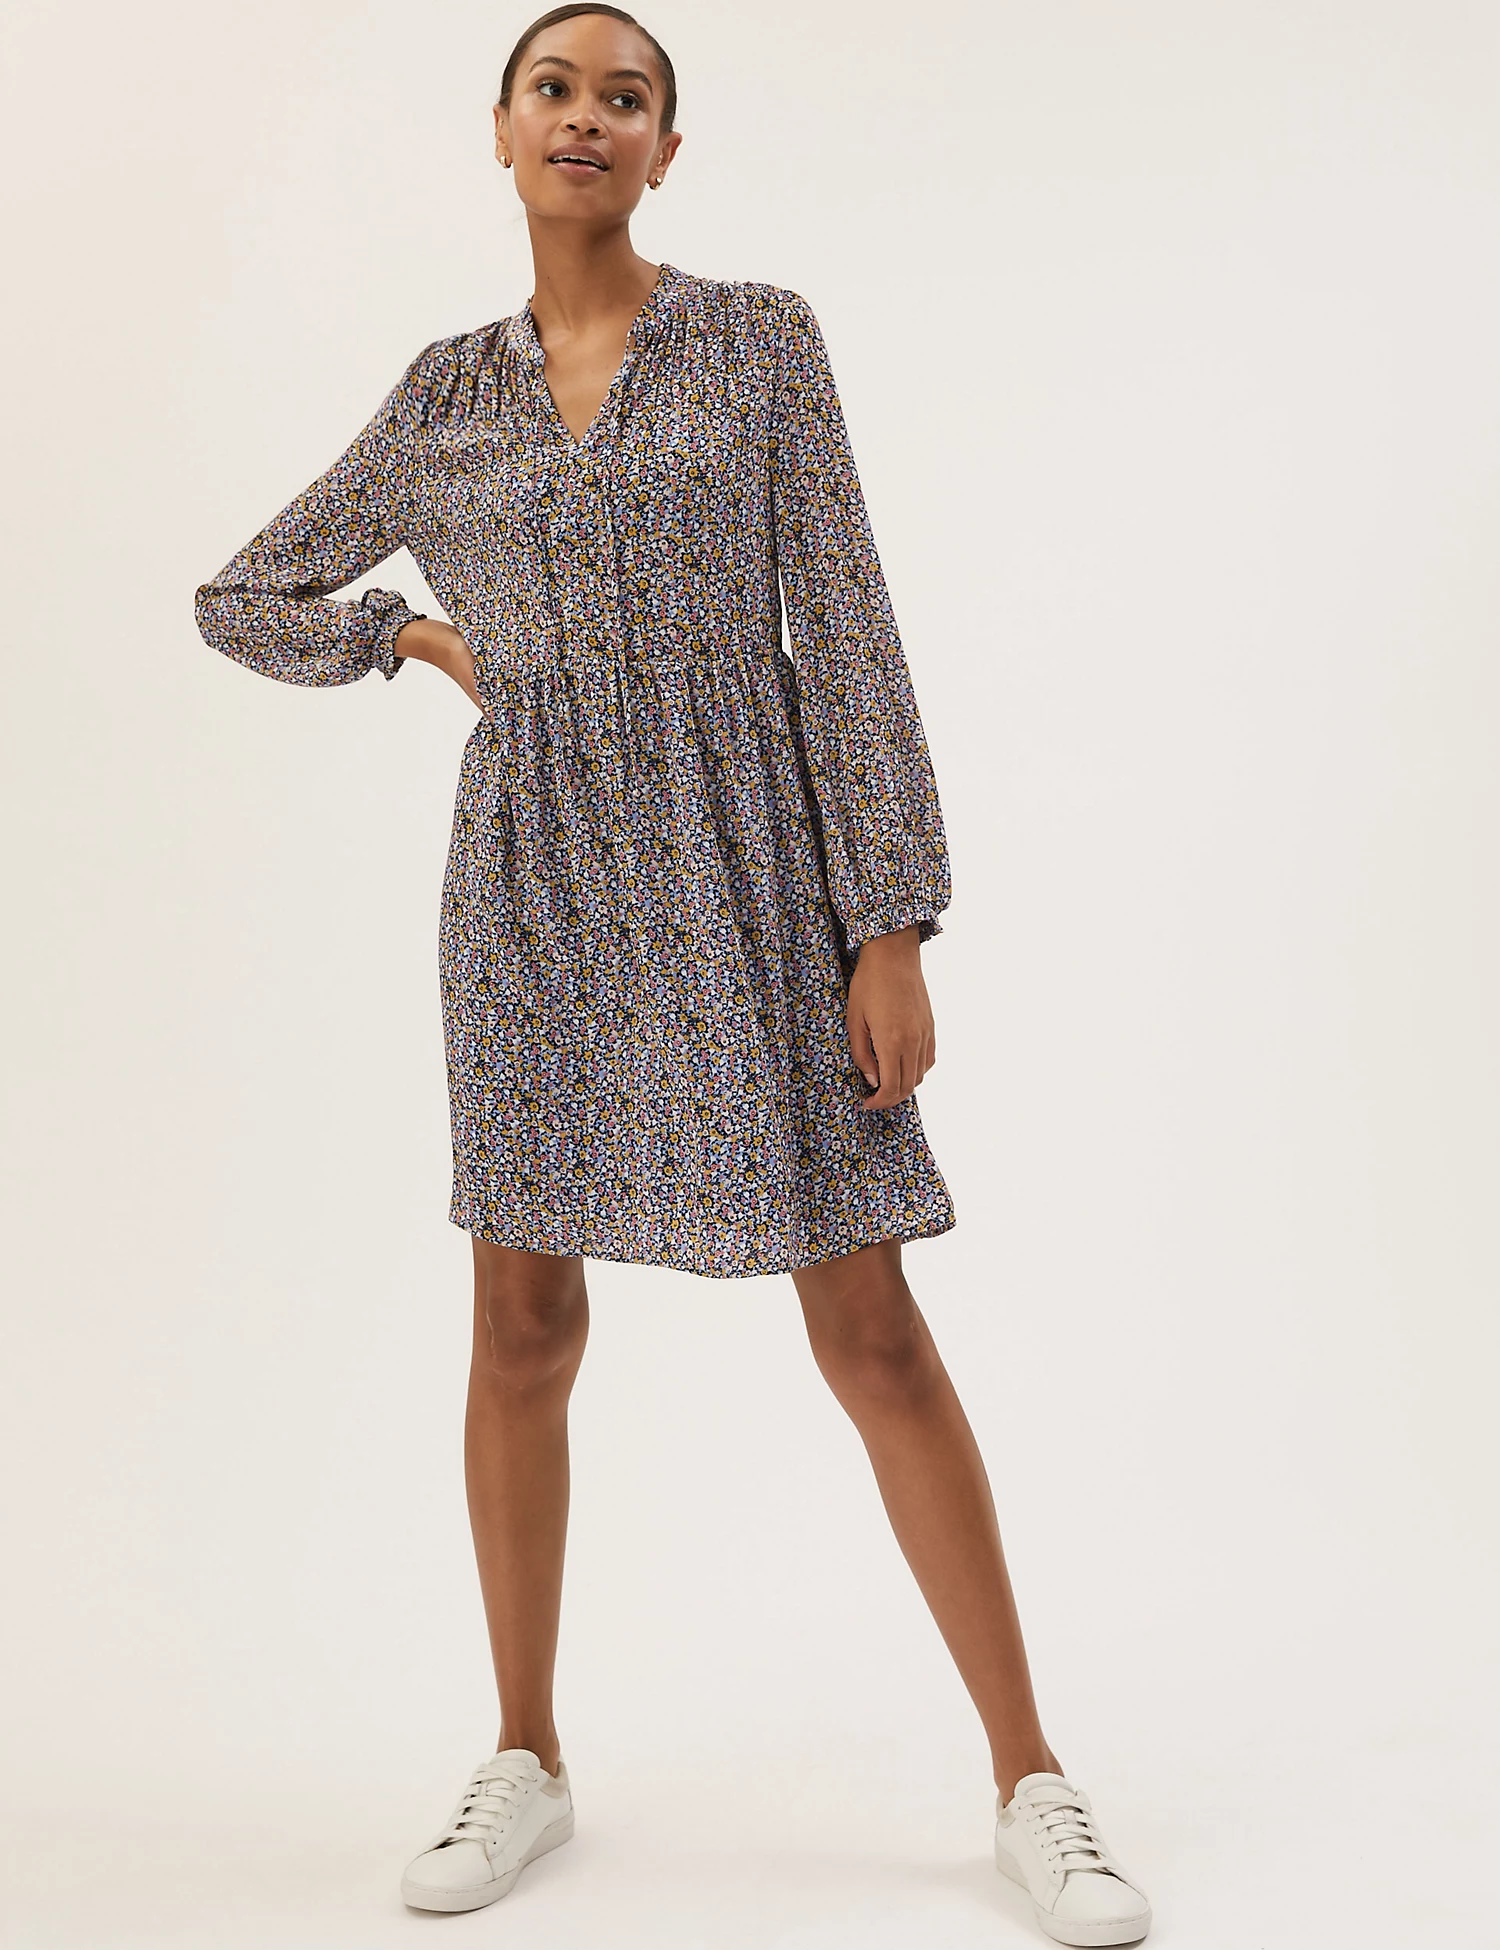 Holly Willoughby Sheer Ditsy Dress August 2022 – Fashion You Really Want